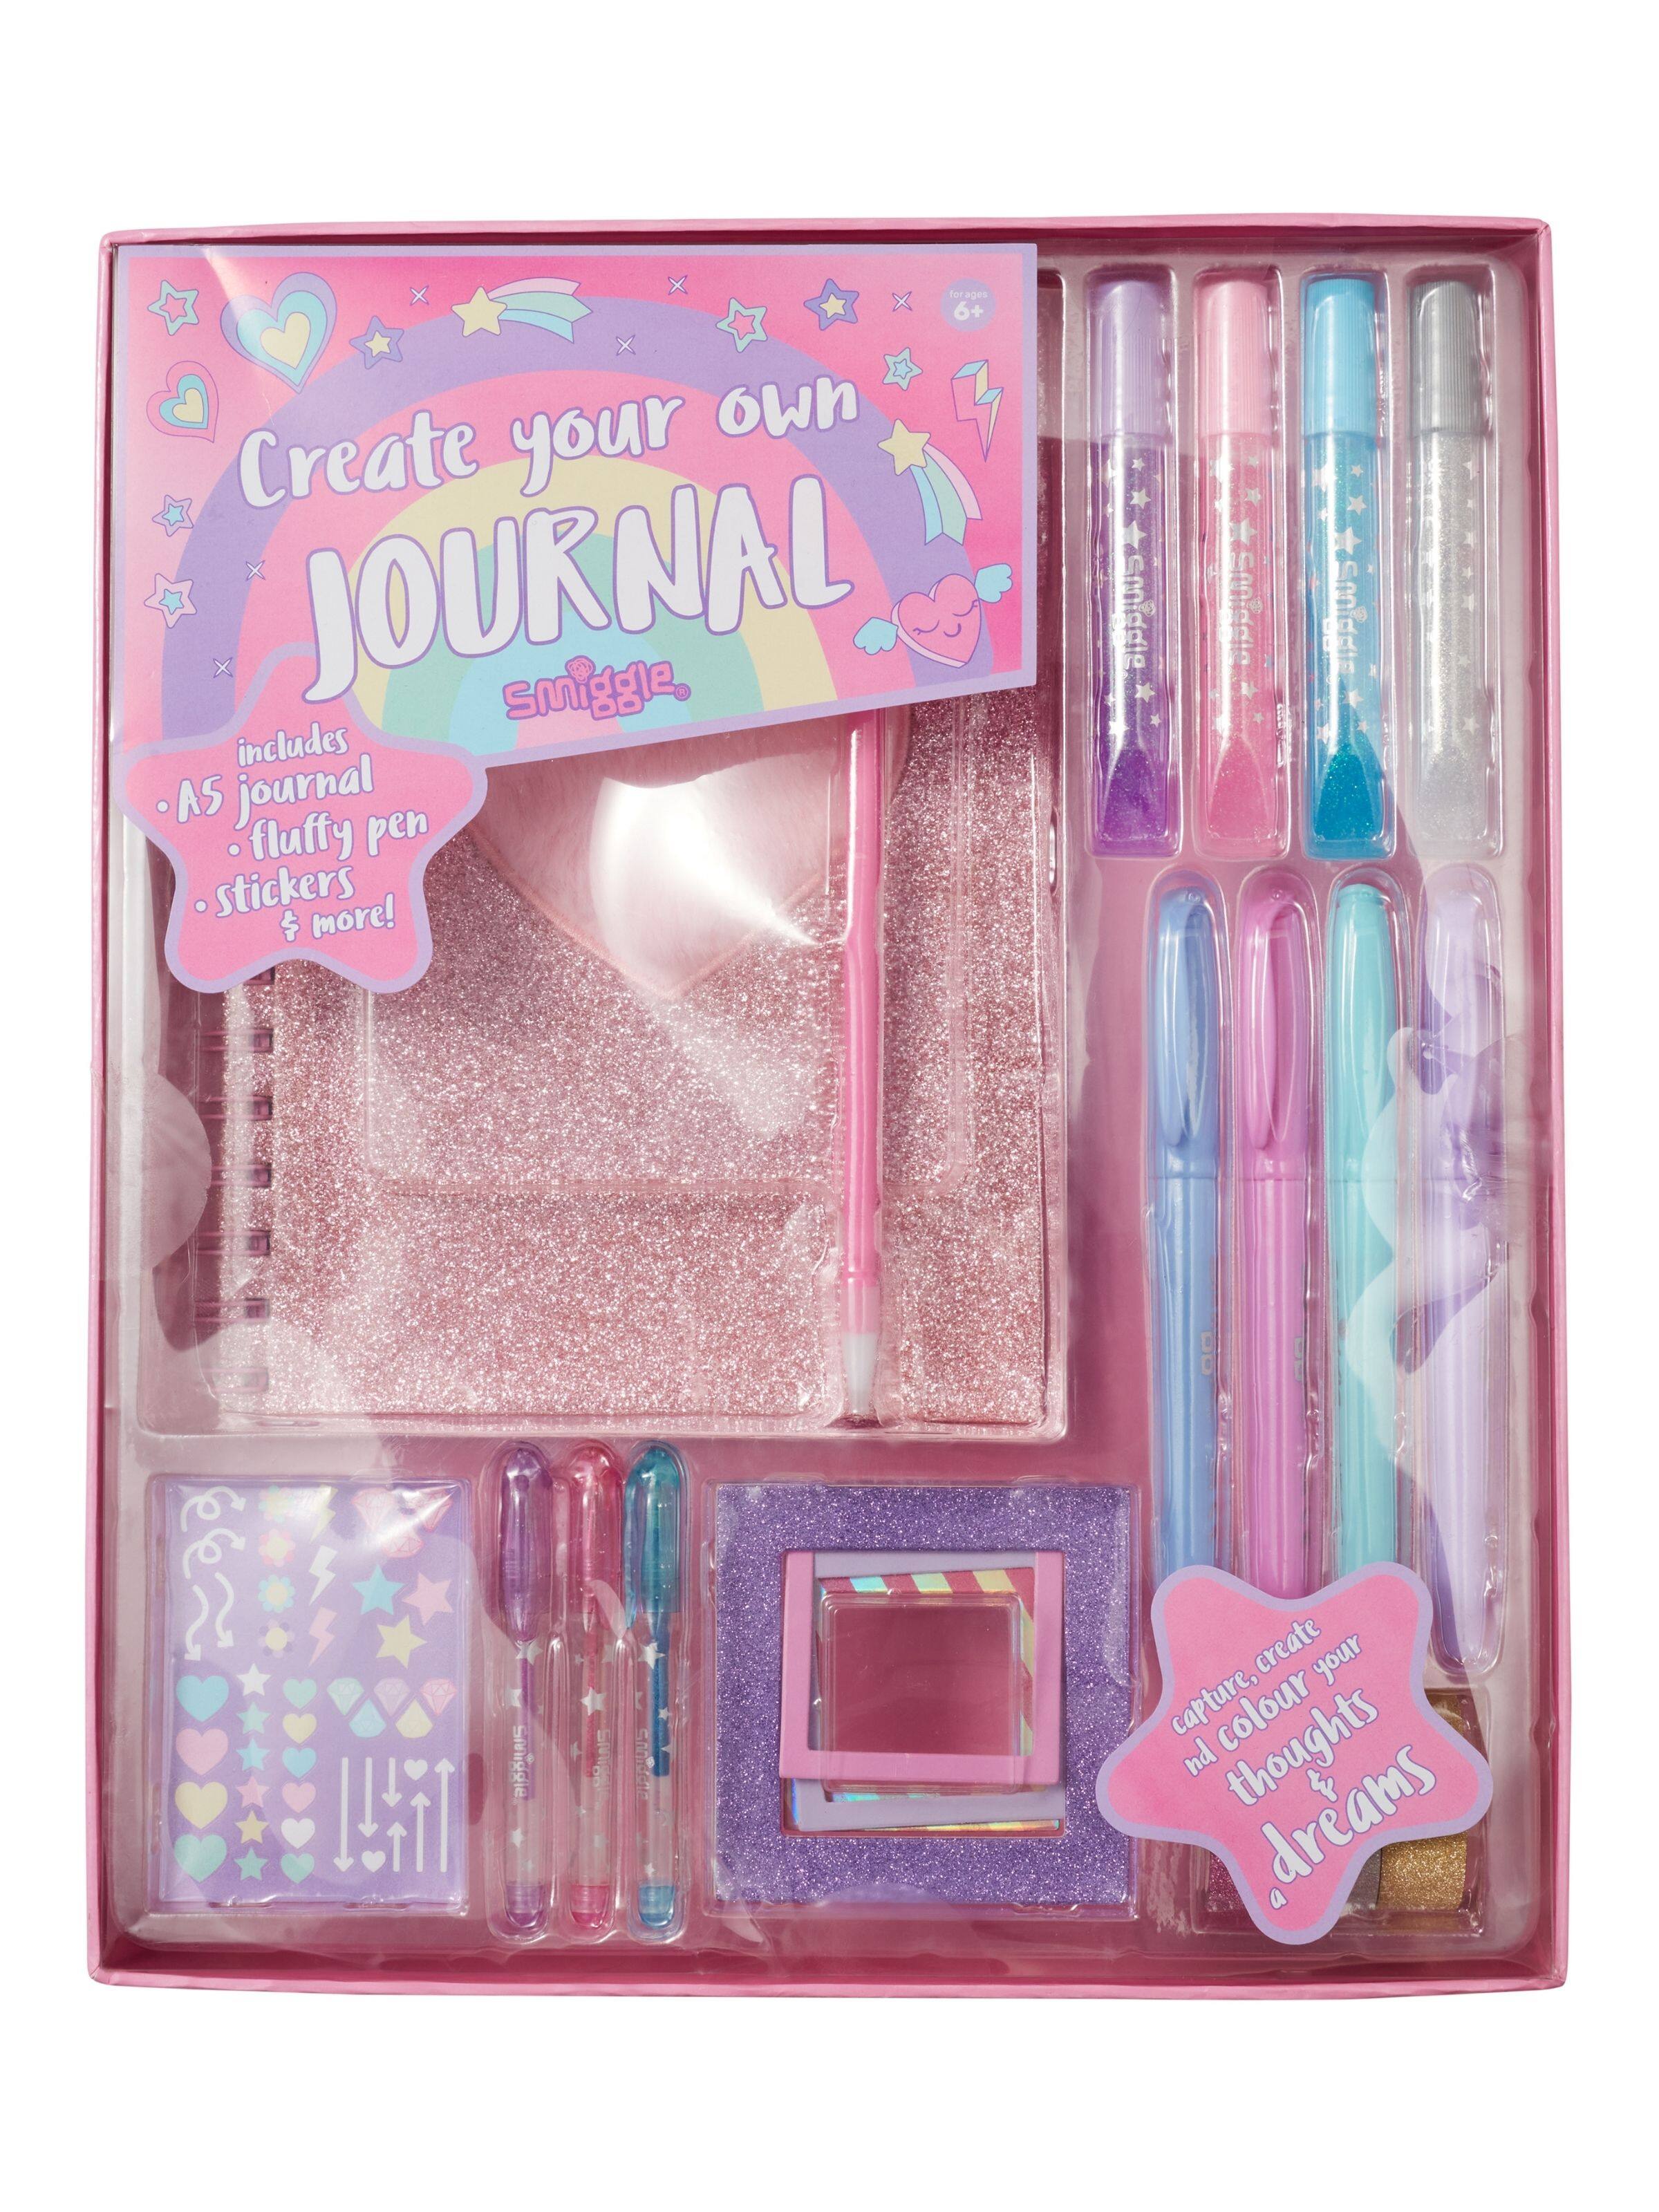 Great Choice Products Journal Kit For Girls - Art And Crafts Gift For Kids  Age 6+ Kids Scrapbook Kits & Diary Supplies Set - Cool Diary For Girls